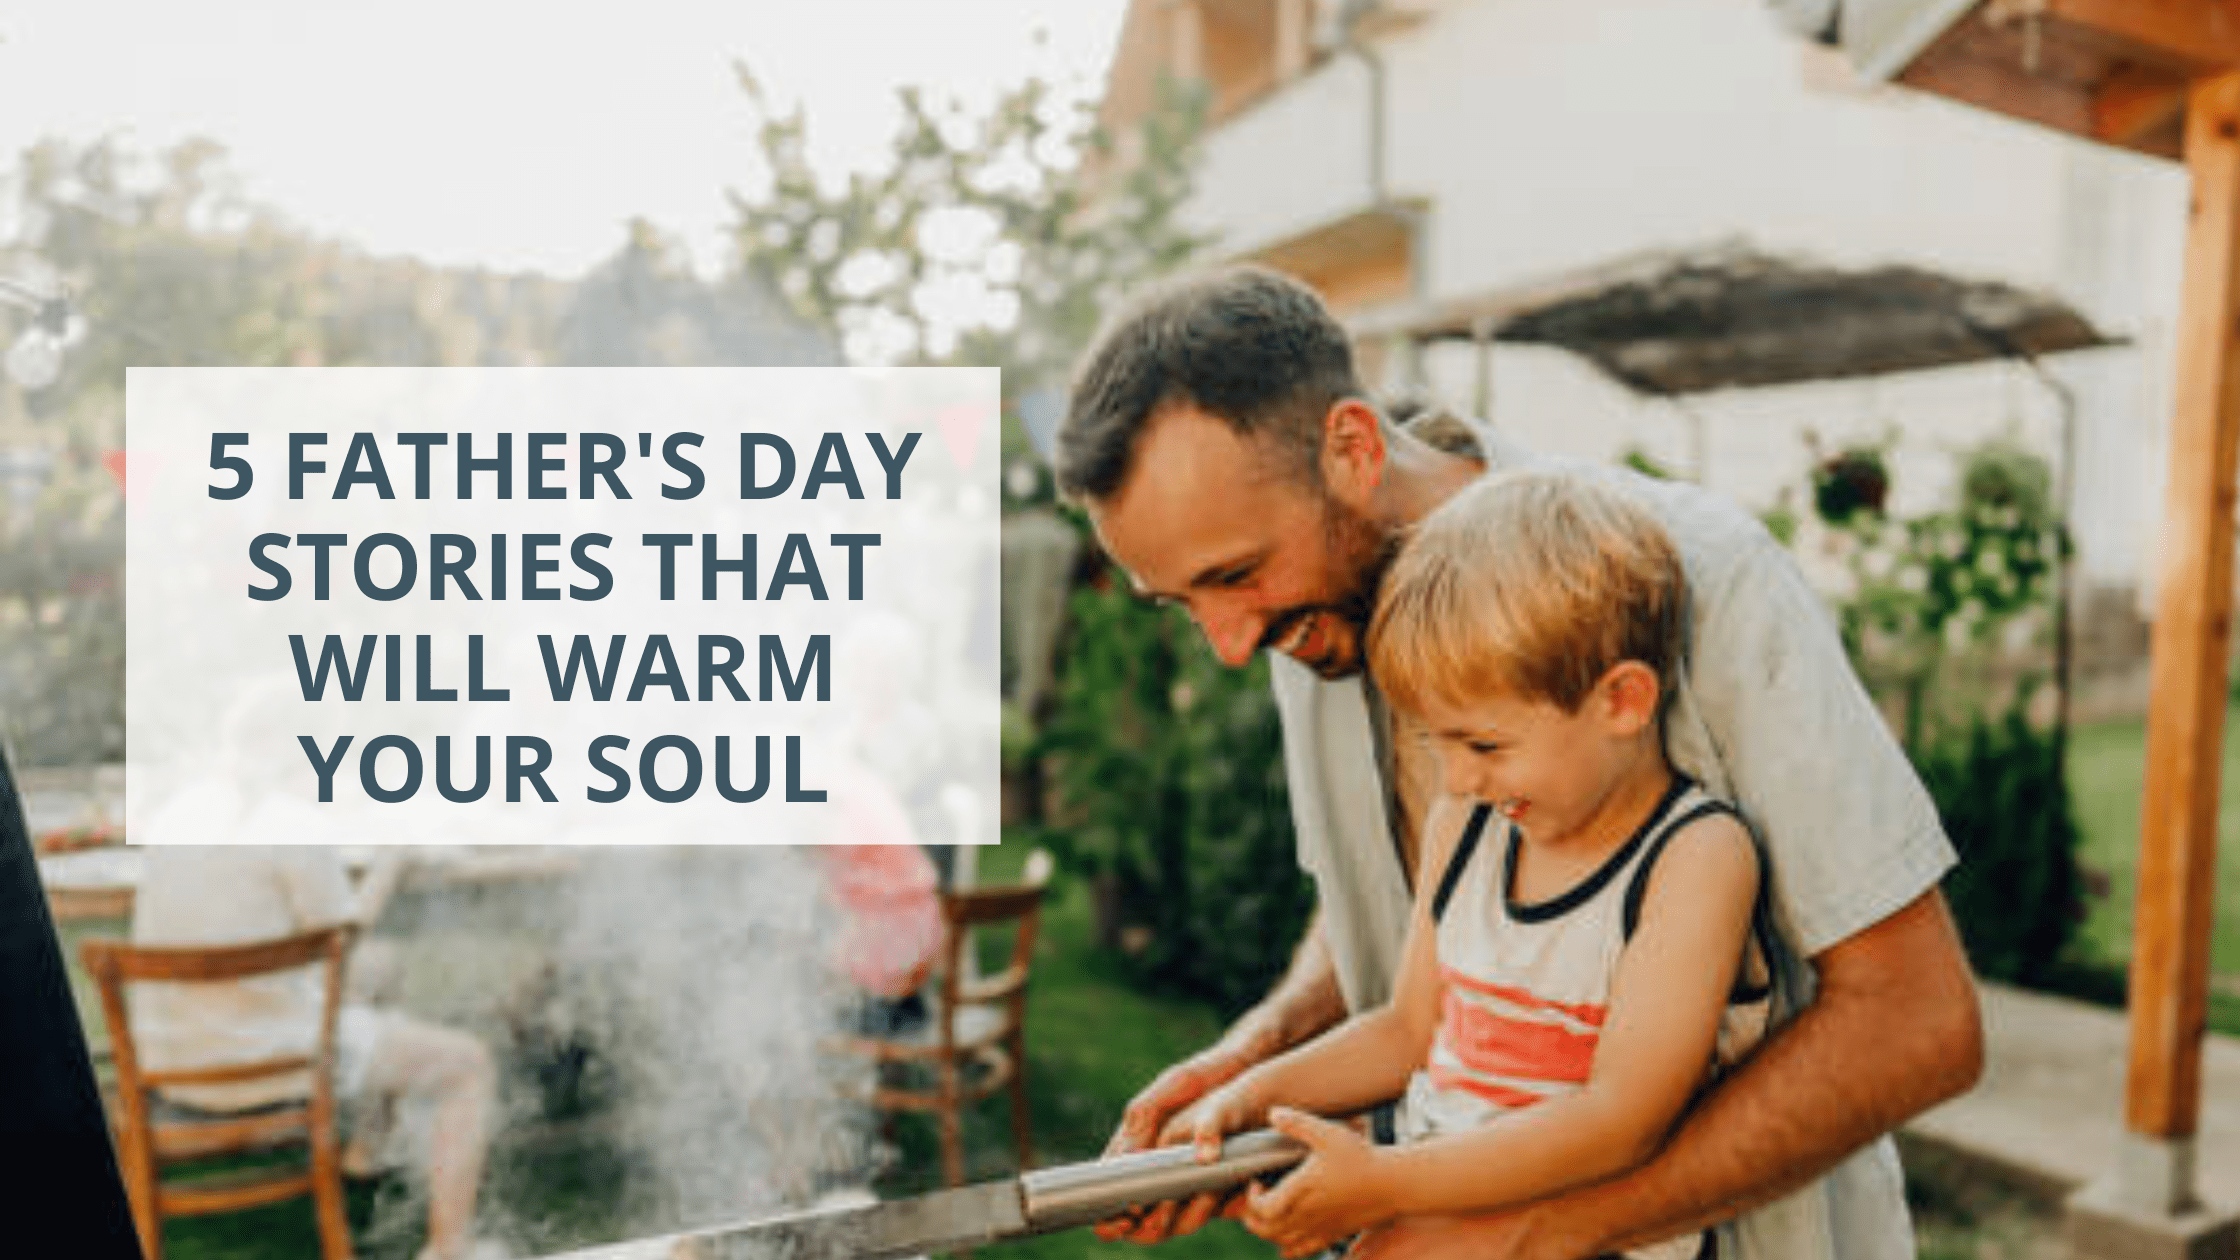 5 Heartwarming Father's Day Stories That Will Warm Your Soul